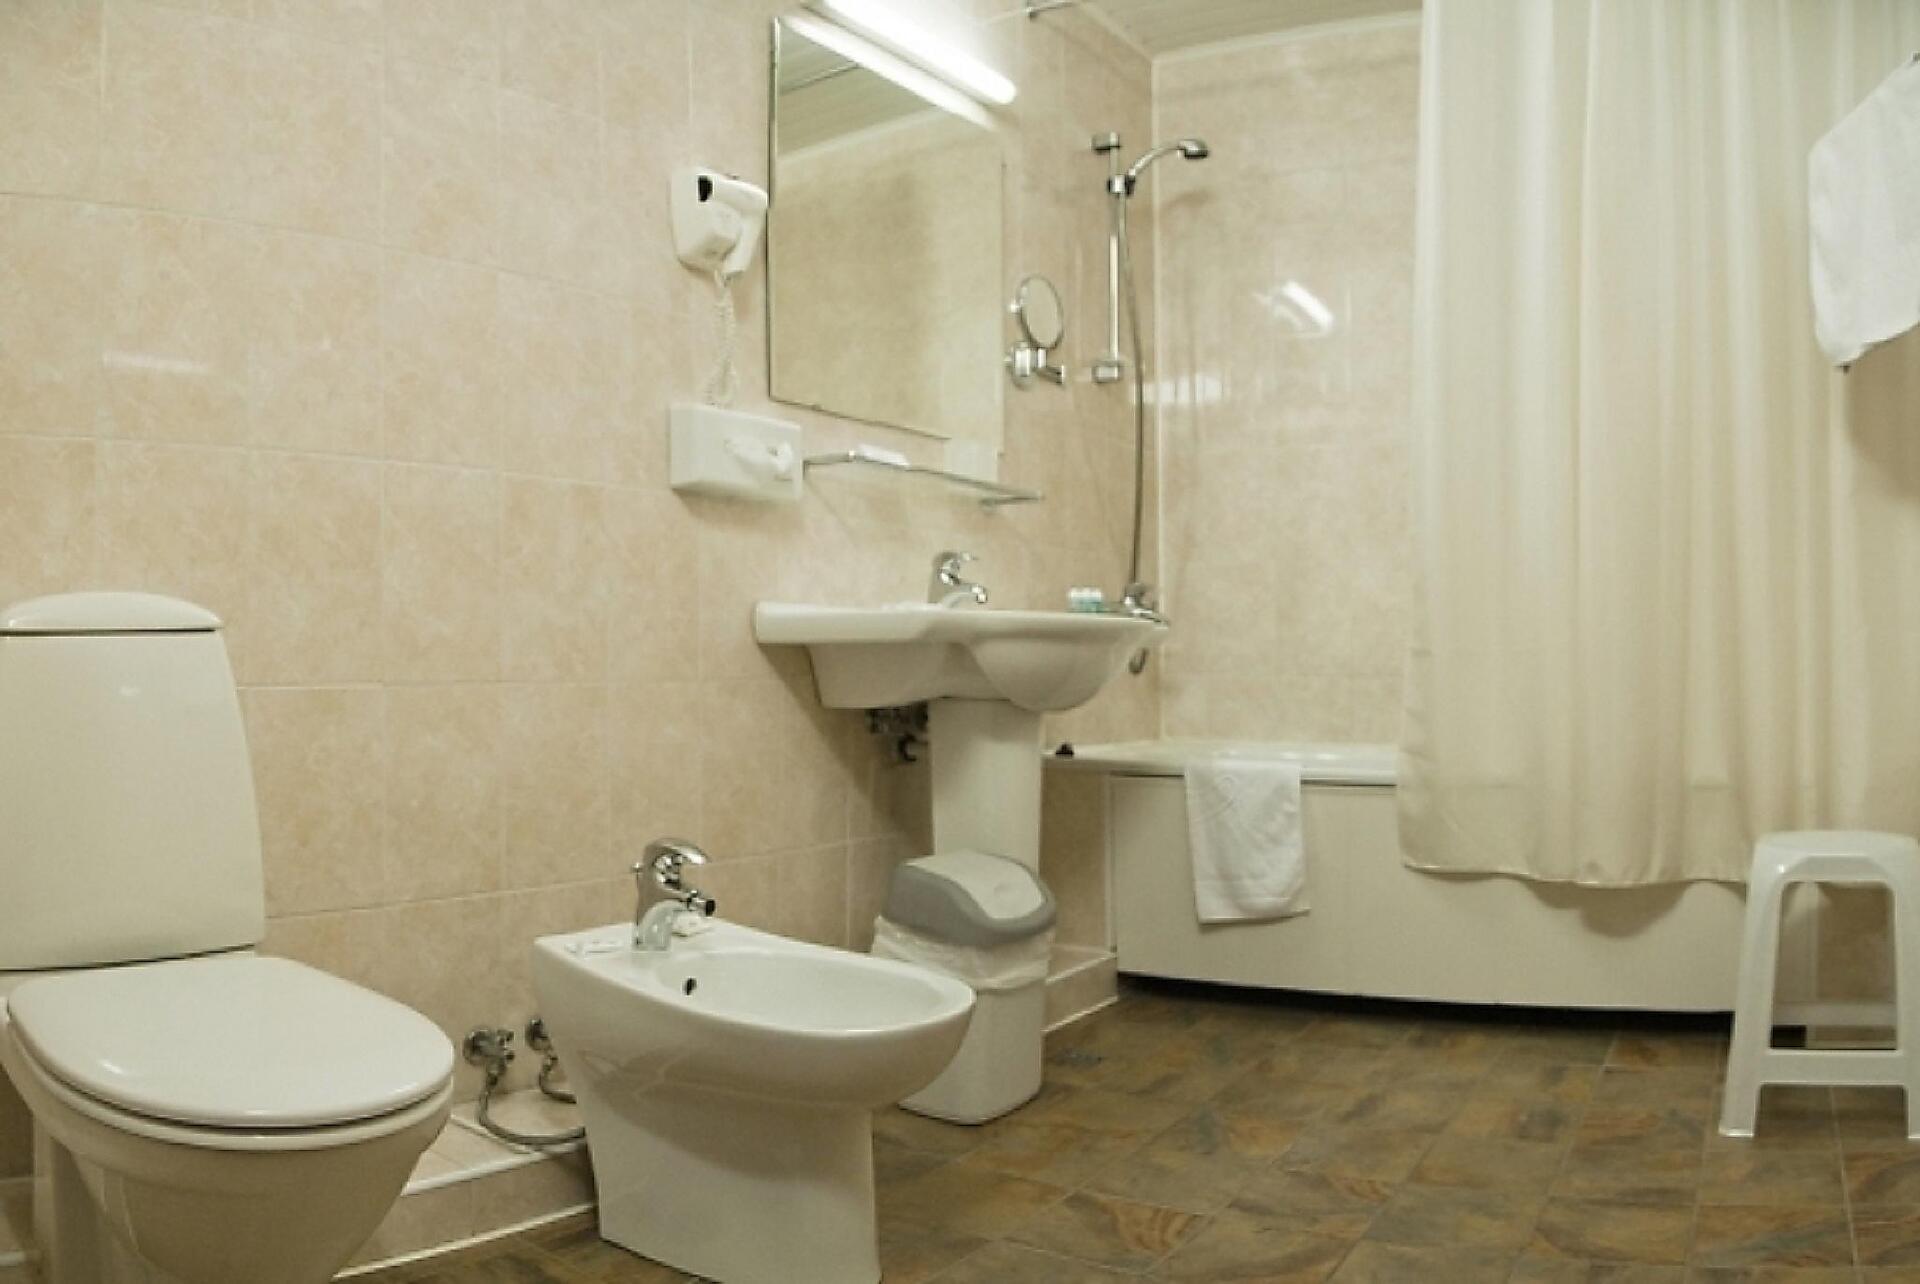 Moscow Hotel: Room TWIN COMFORT